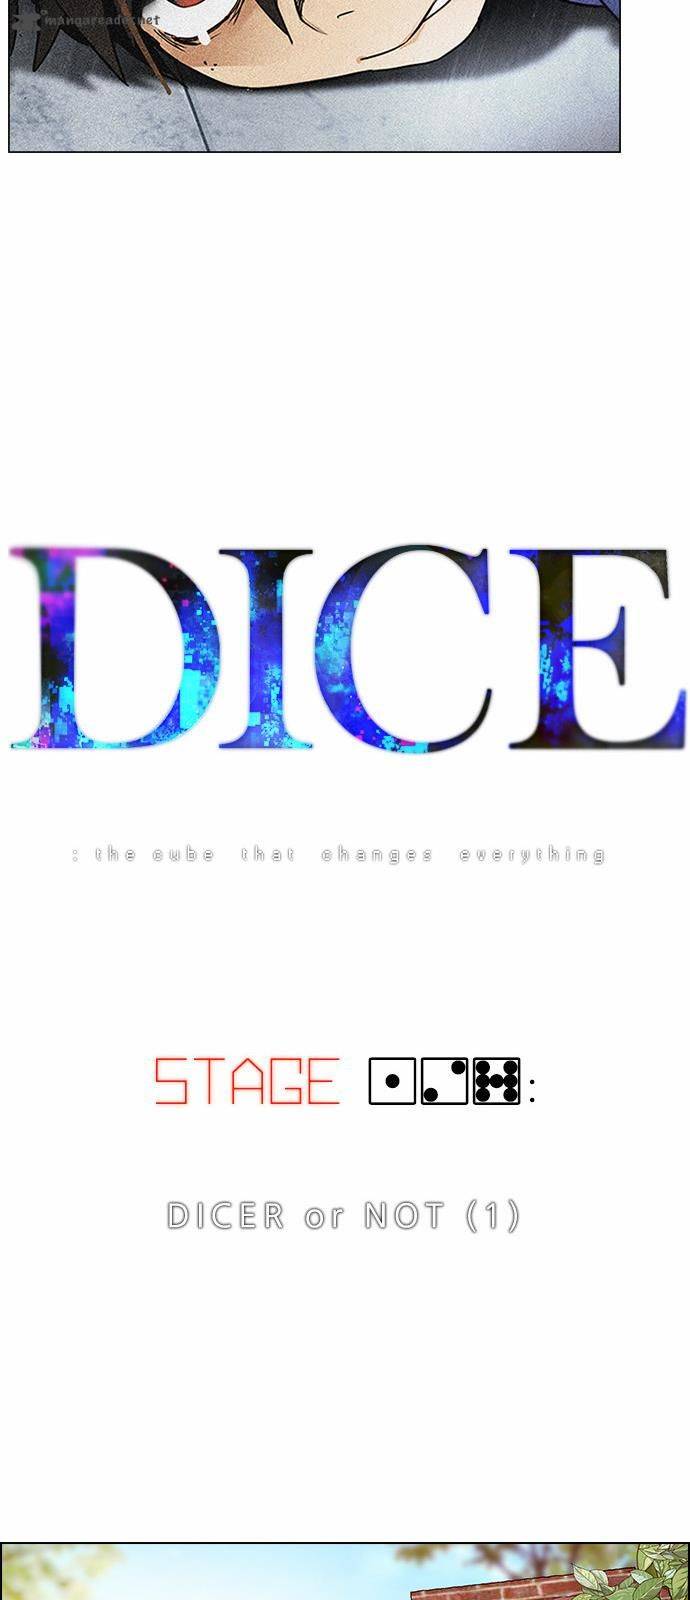 dice_the_cube_that_changes_everything_127_5